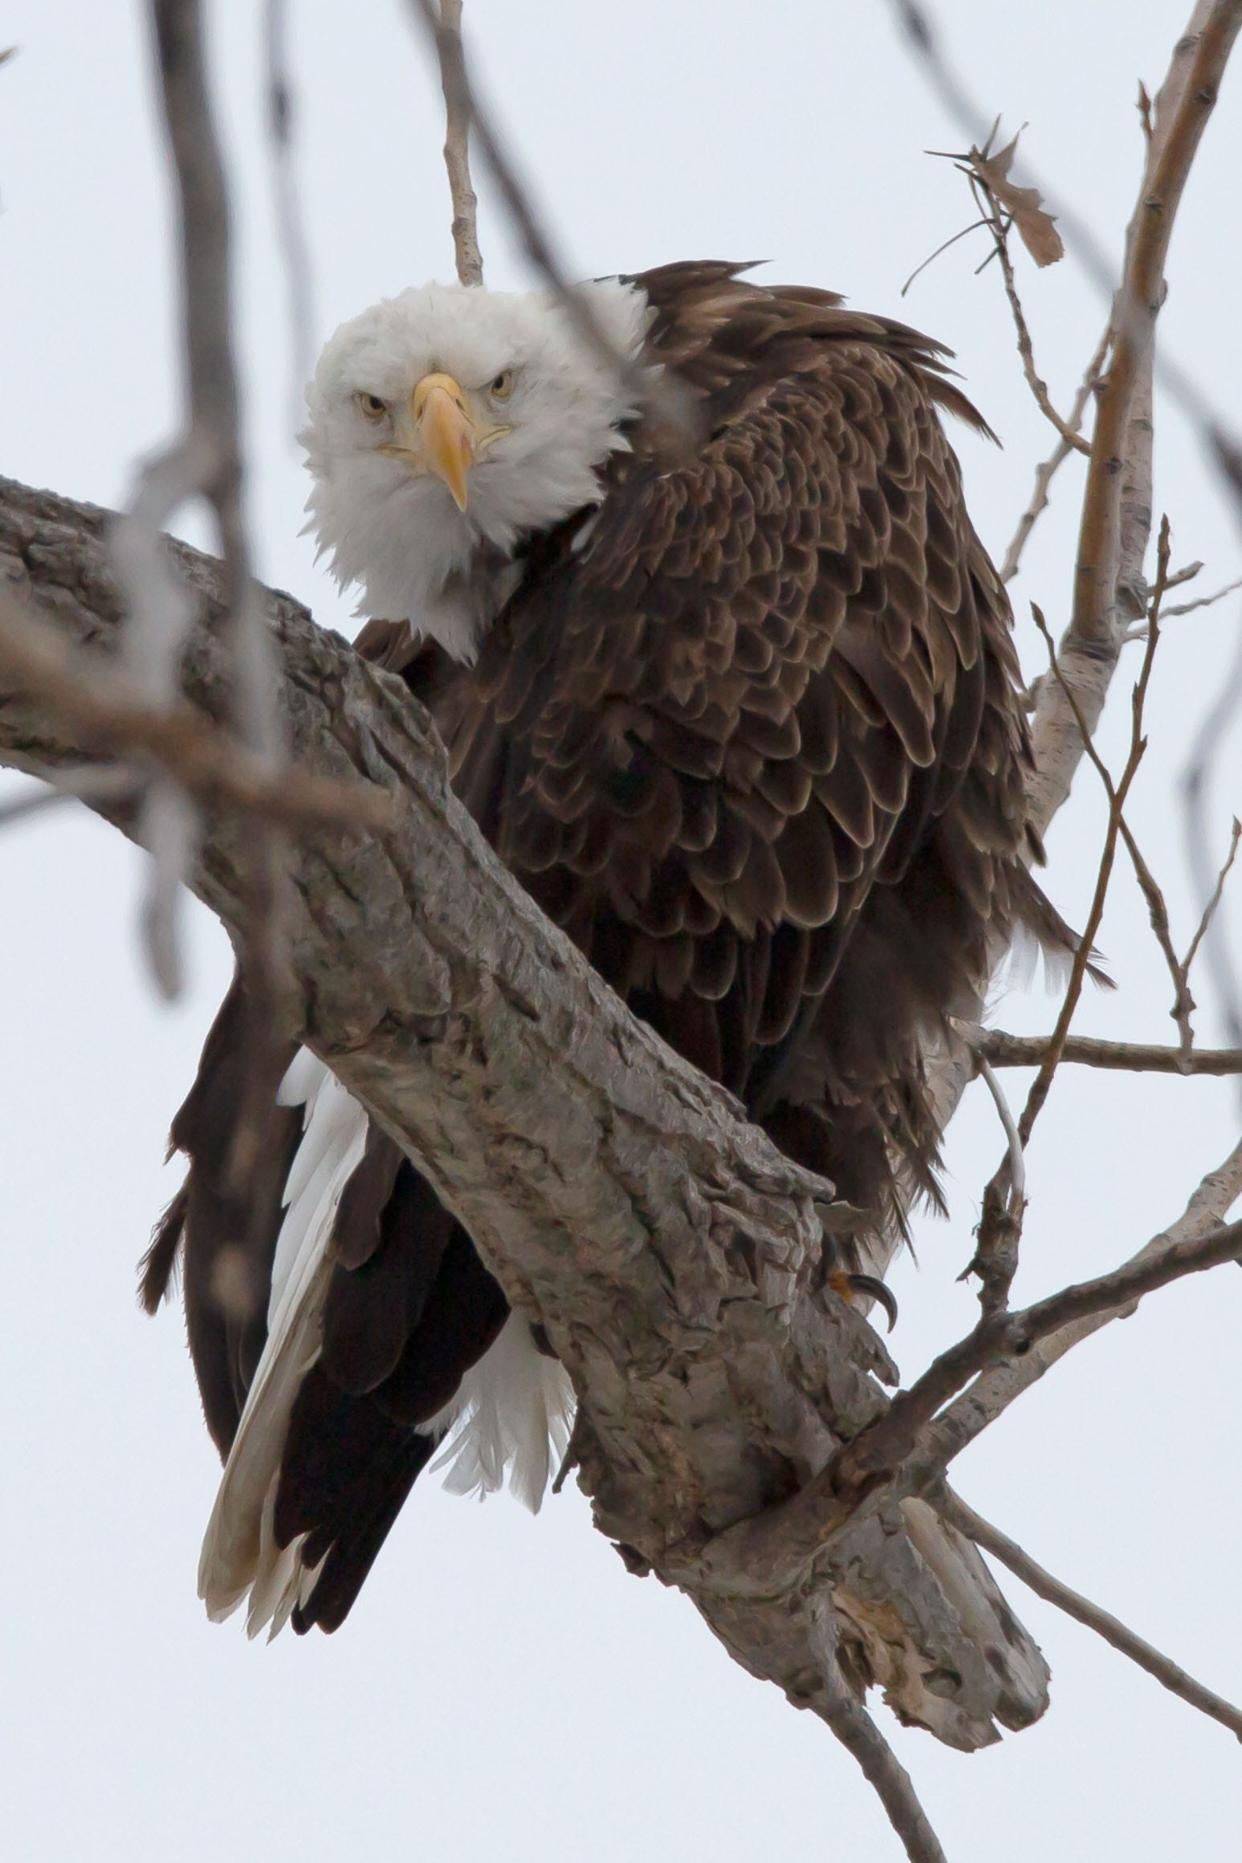 A bald eagle from the pair known locally as the Nagoya Eagles perches in 2023 on Catawba Island, where they can be seen fishing and flying over the Que Restaurant.